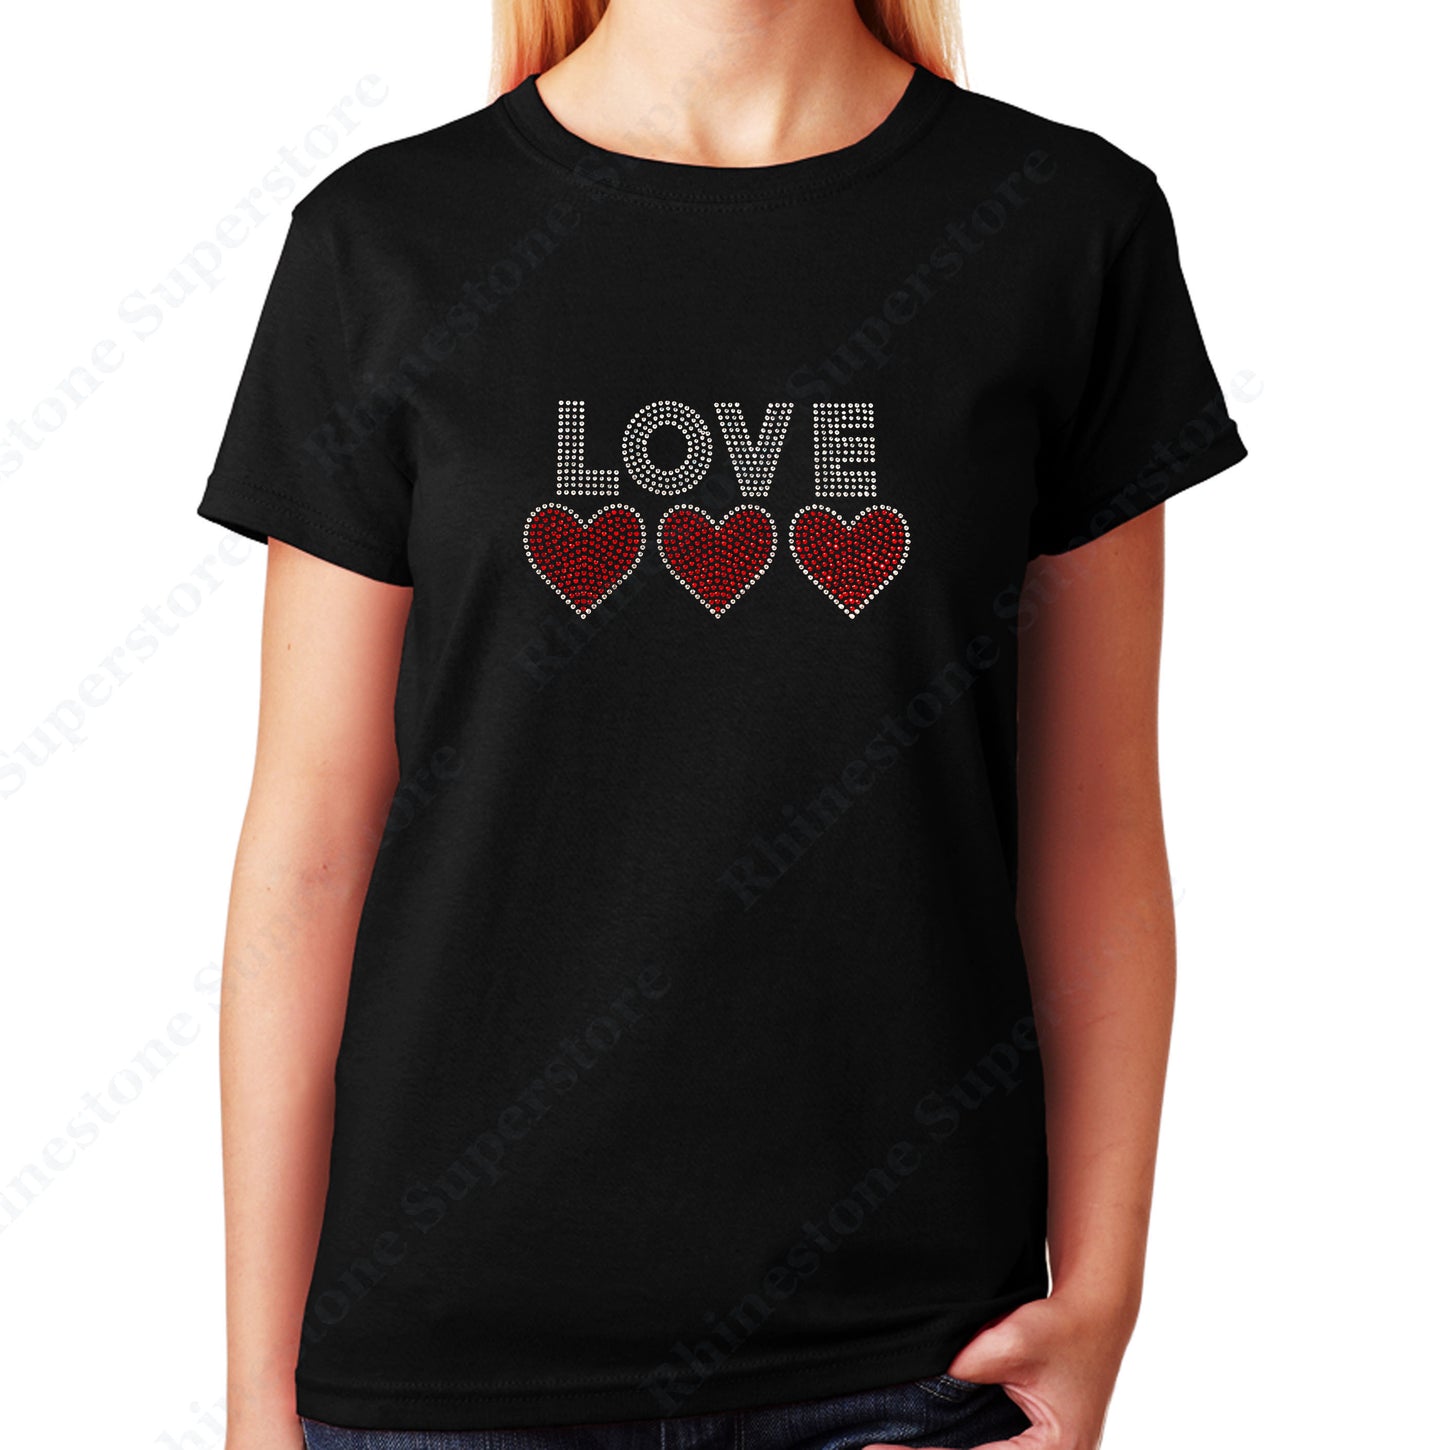 Women's / Unisex T-Shirt with Love with 3 Hearts in Rhinestones